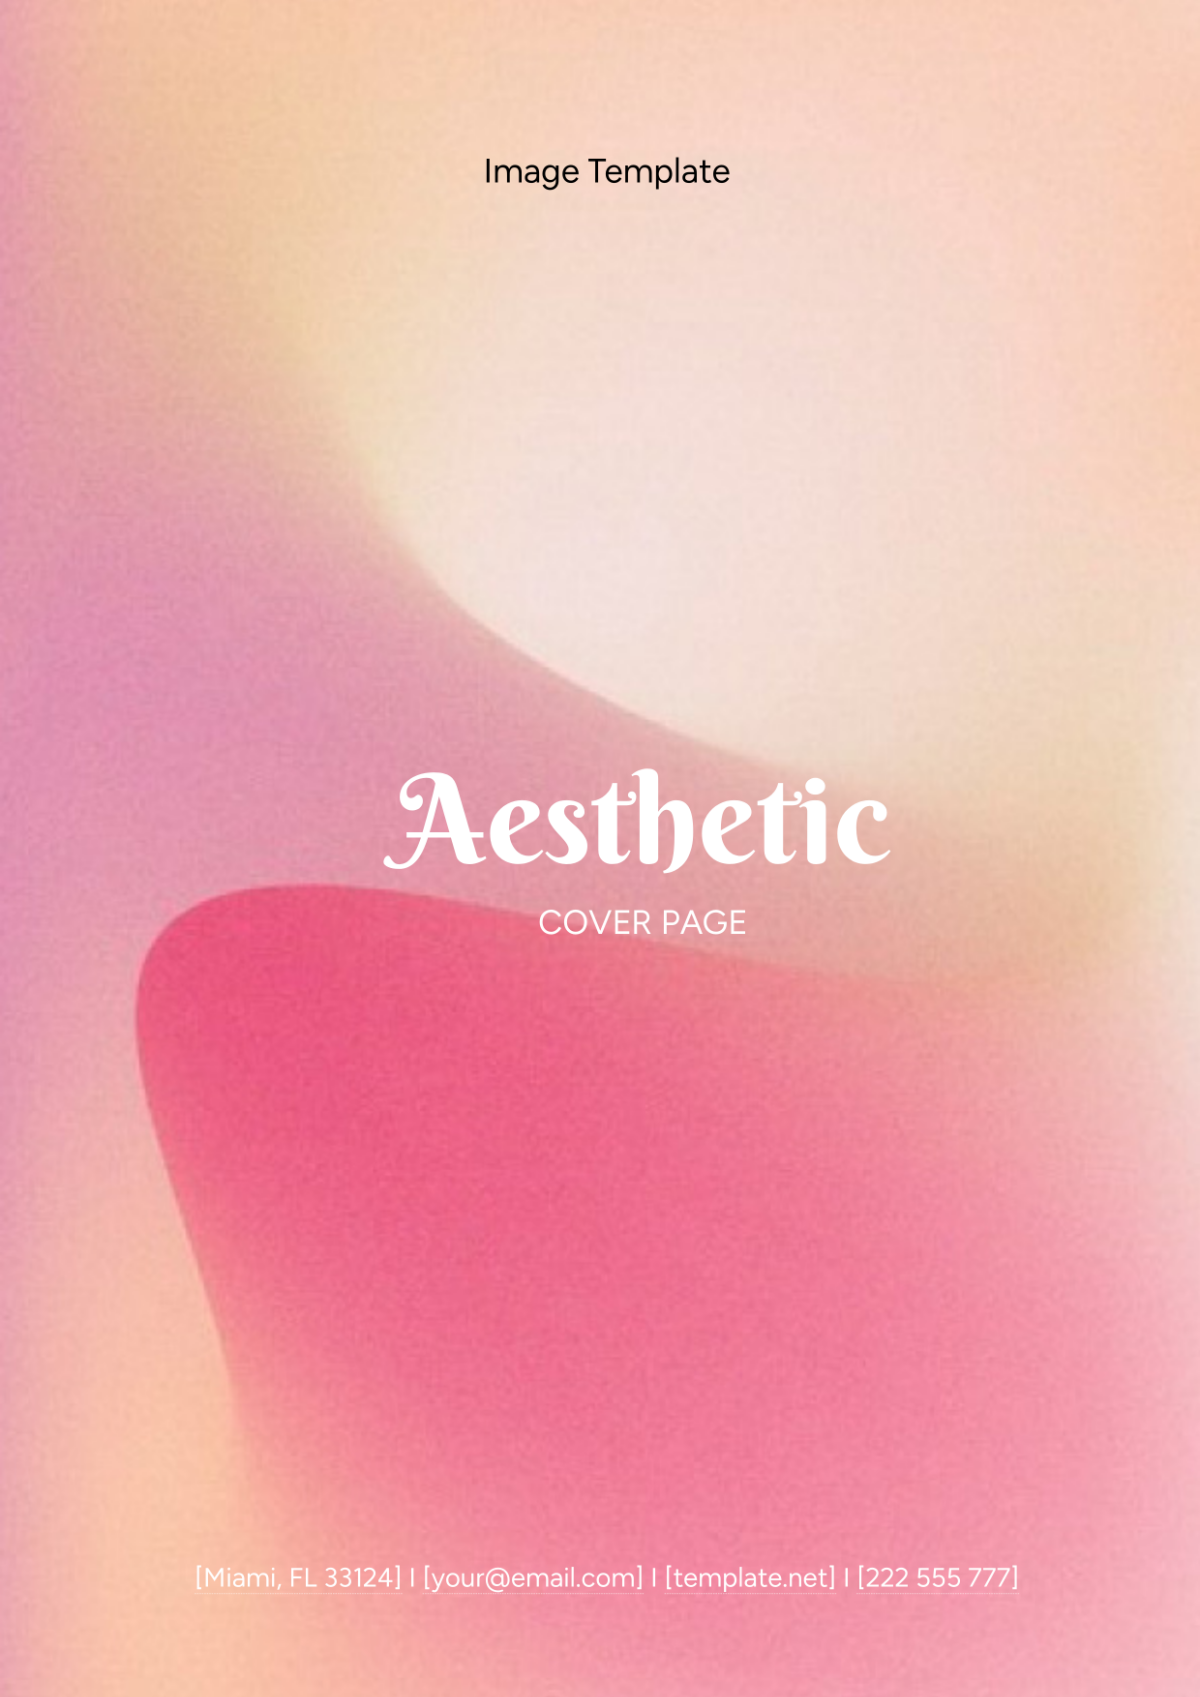 Free Aesthetic Cover Page Image Template